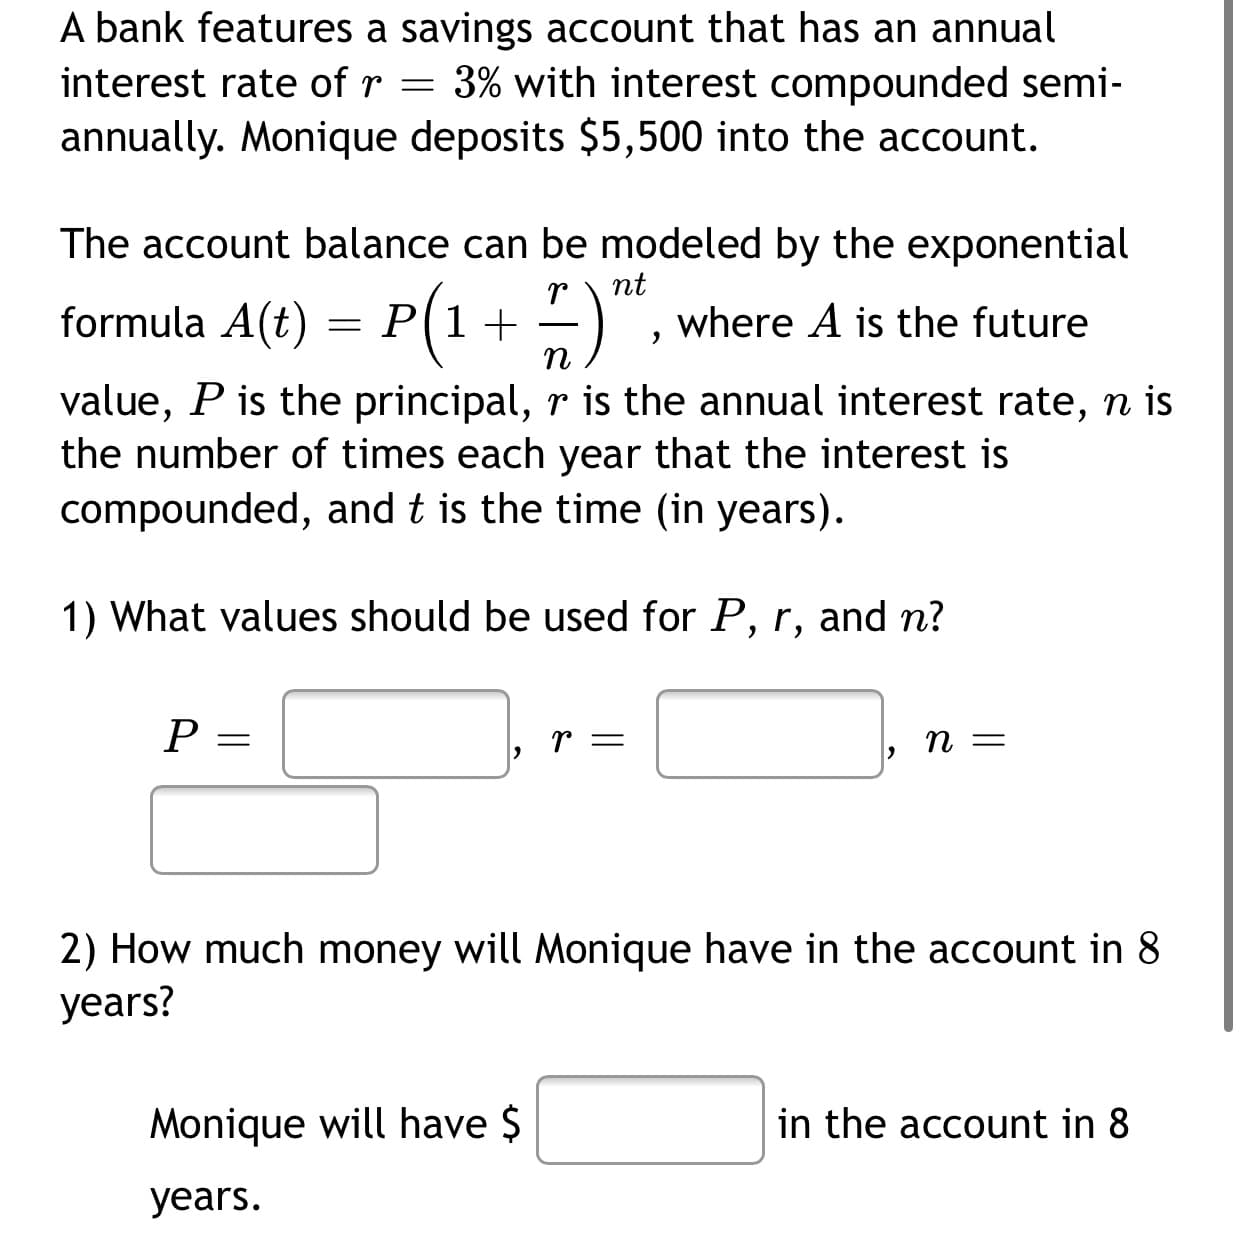 A bank features a savings account that has an annual
interest rate of r = 3% with interest compounded semi-
annually. Monique deposits $5,500 into the account.
The account balance can be modeled by the exponential
nt
formula A(t) = P(1+ –)
where A is the future
n
value, P is the principal, r is the annual interest rate, n is
the number of times each year that the interest is
compounded, and t is the time (in years).
1) What values should be used for P, r, and n?
P
r =
п —
2) How much money will Monique have in the account in 8
years?
Monique will have $
in the account in 8
years.
